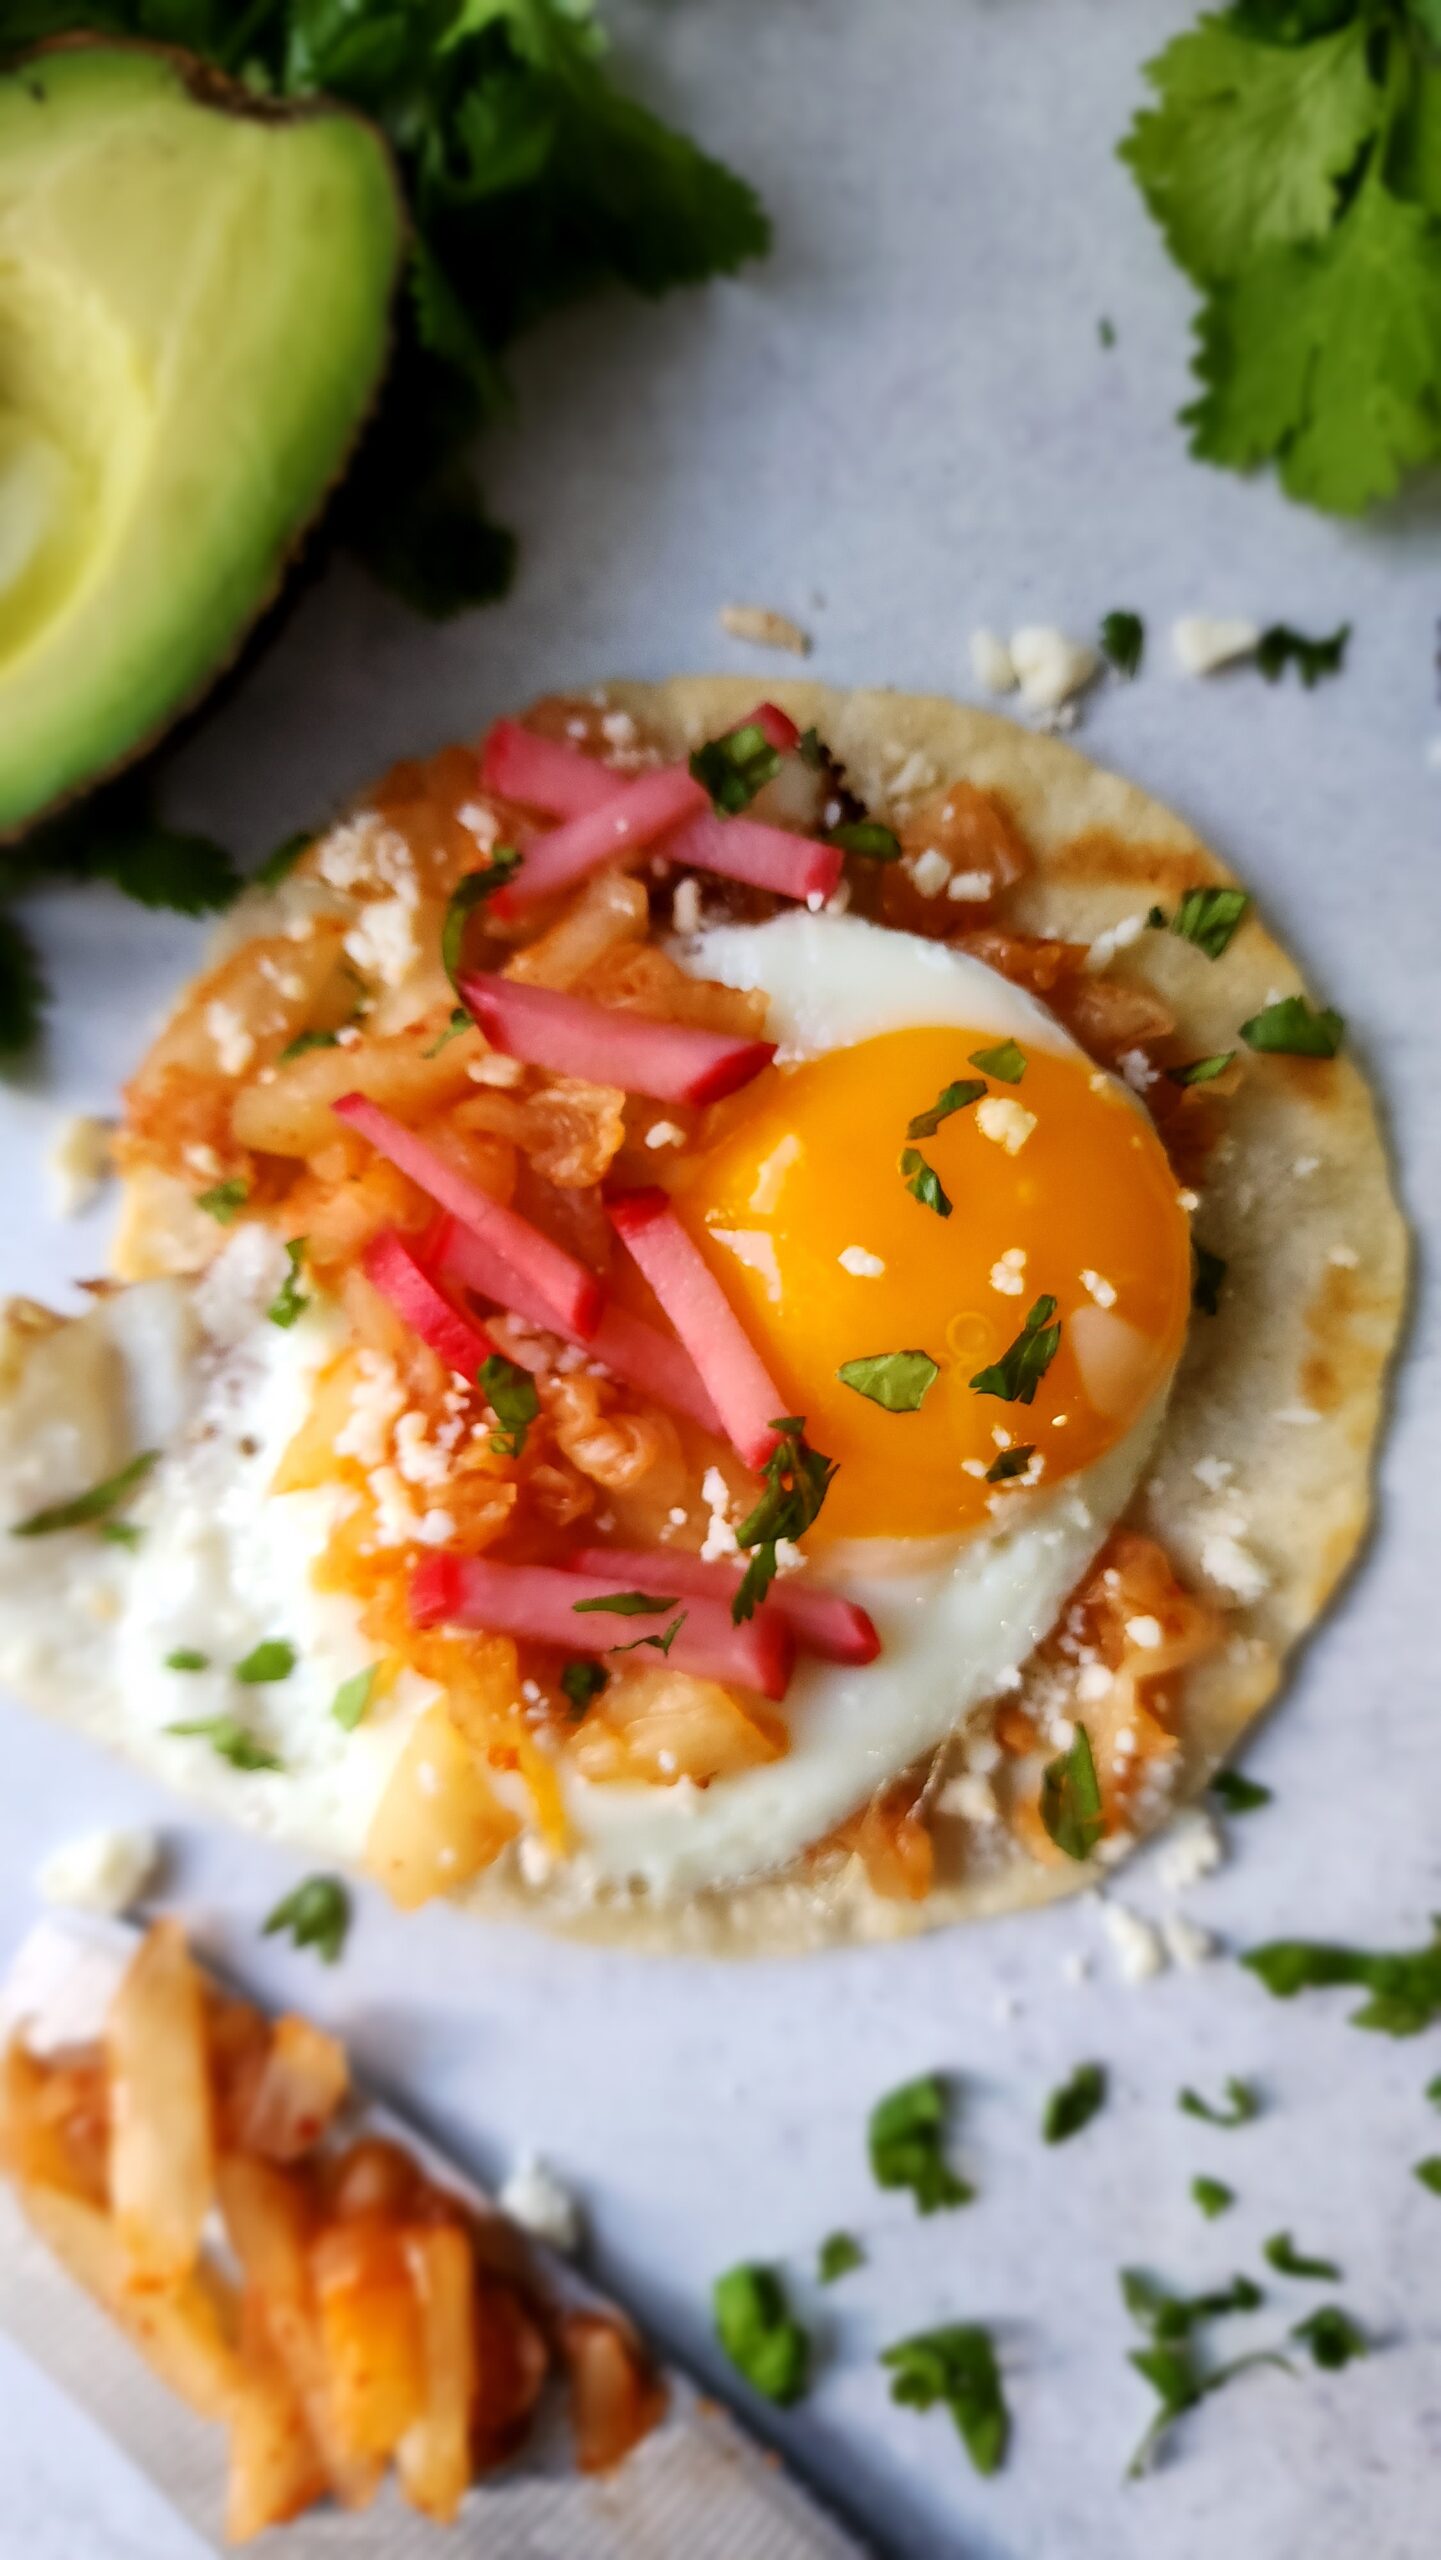 'Fried' Egg with Kimchi on a flour tortilla for an egg taco